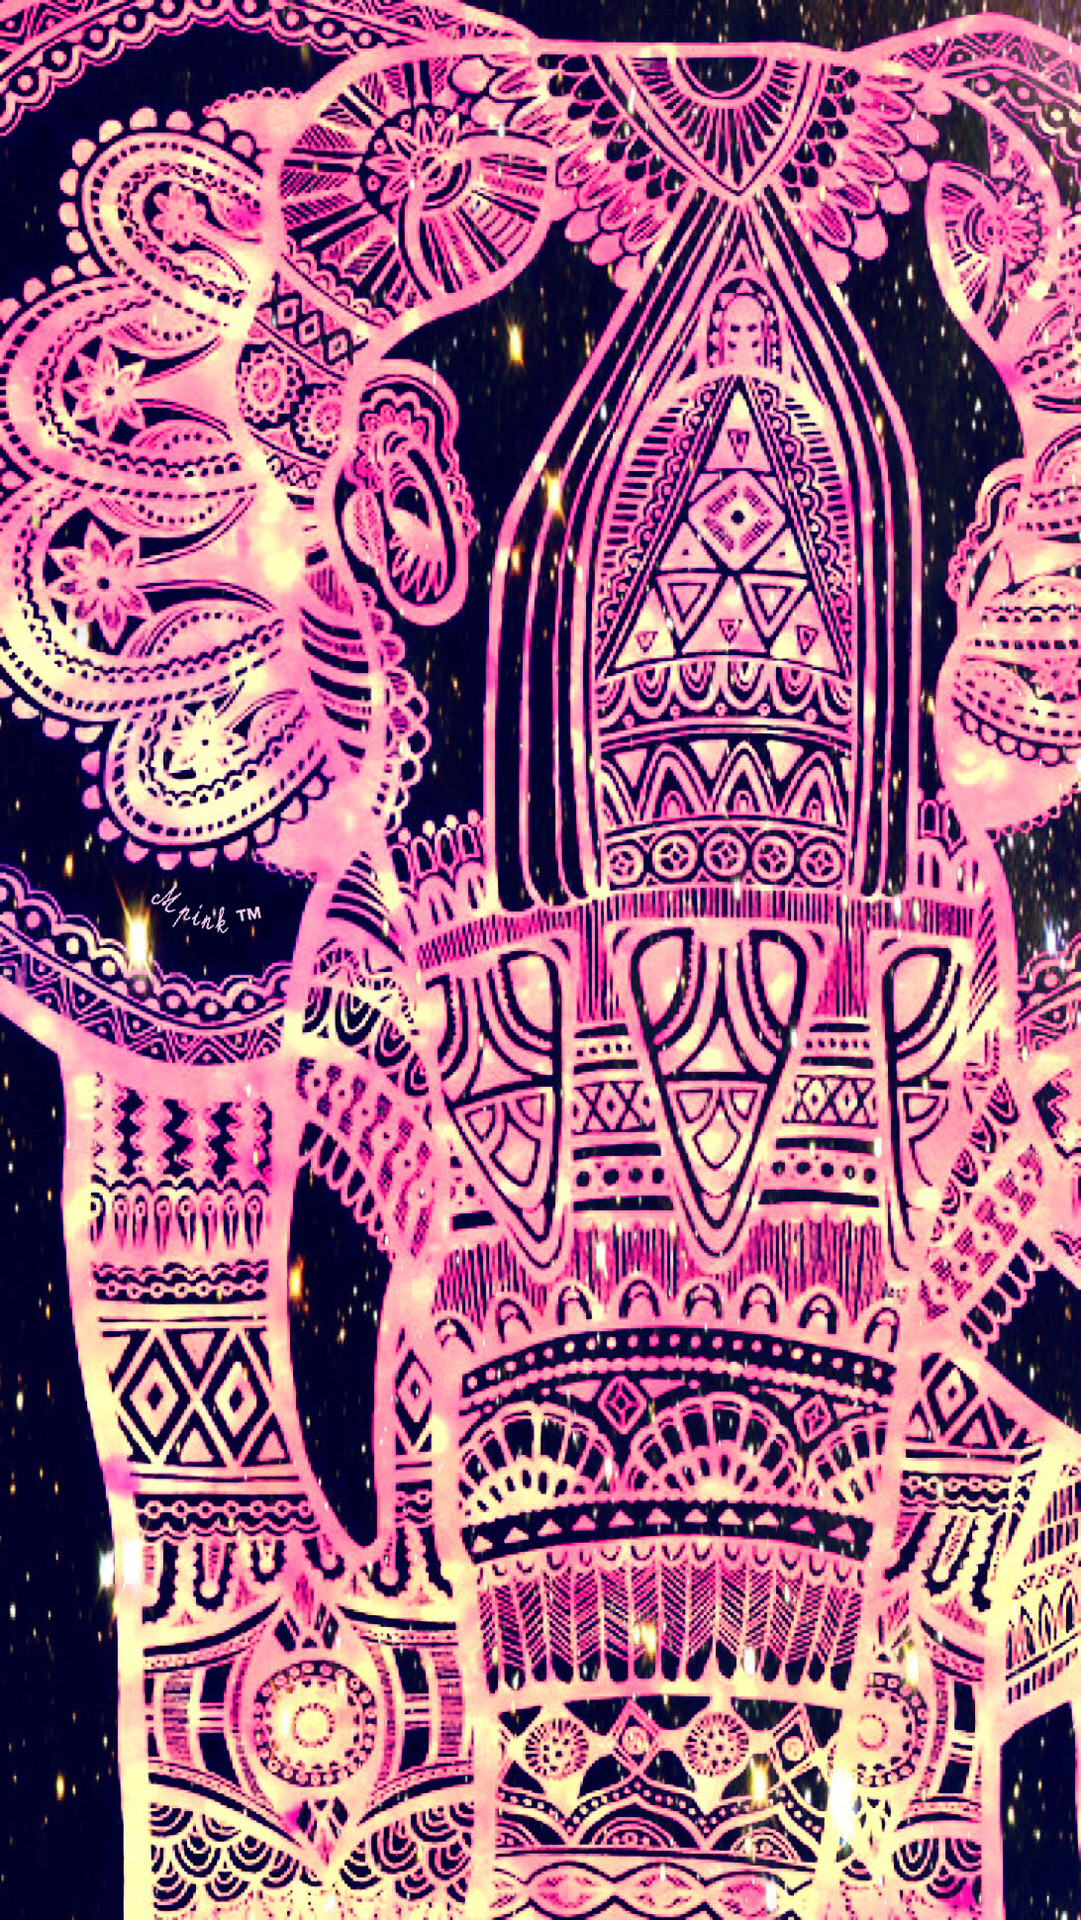 1081x1920 Tribal Pink Elephant Wallpaper/Lockscreen Girly, Cute, Wallpapers for  iPhone, Android, iPad & all other smart devices. Visit my page on CocoPPa  App MPINKâ¢ ...